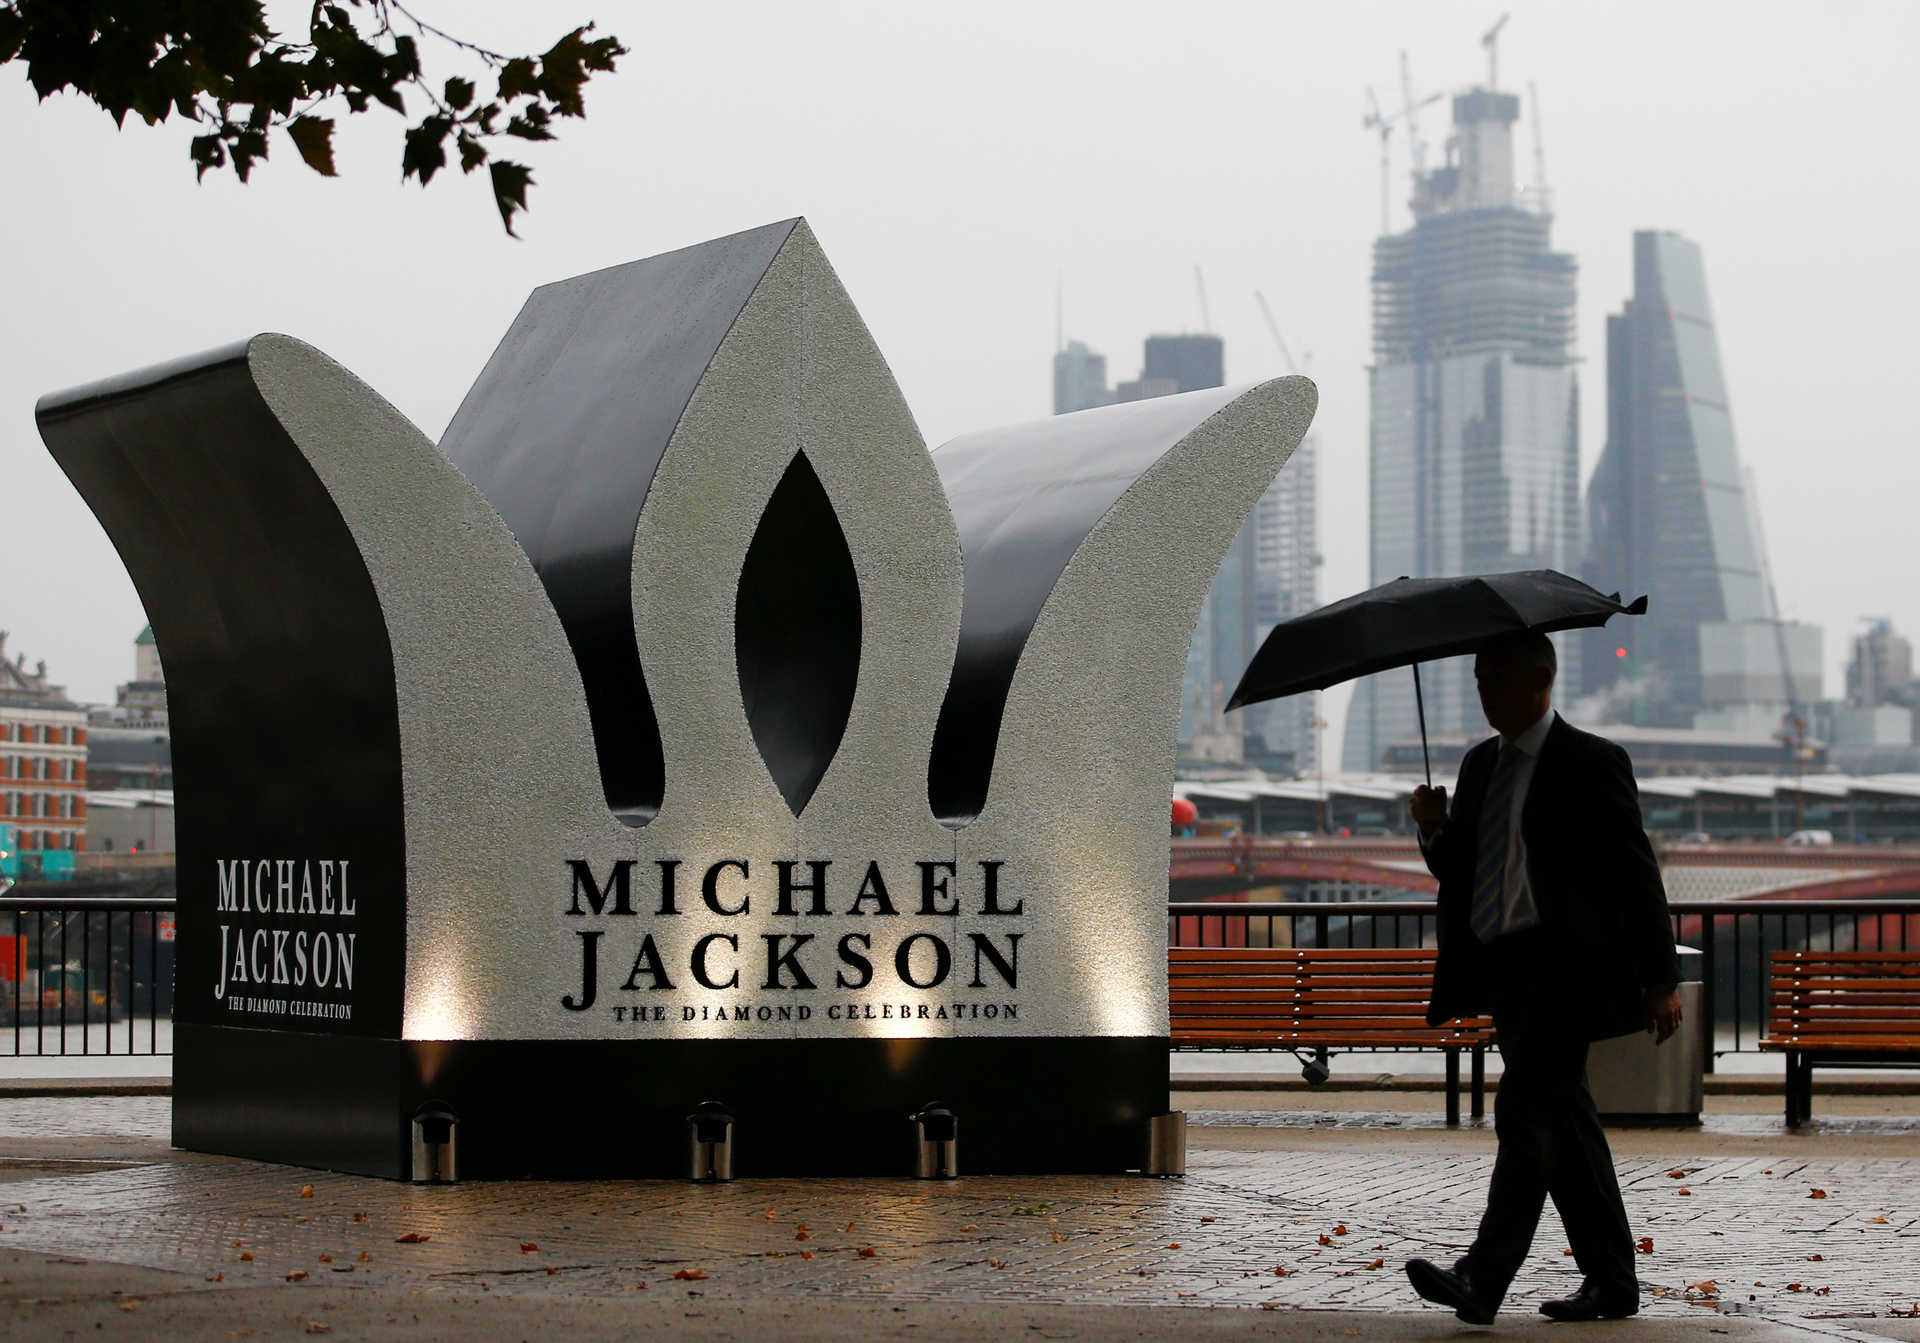 A man walks past a Giant Crown installed to celebrate the 60th birthday of Michael Jackson, on the South Bank in London